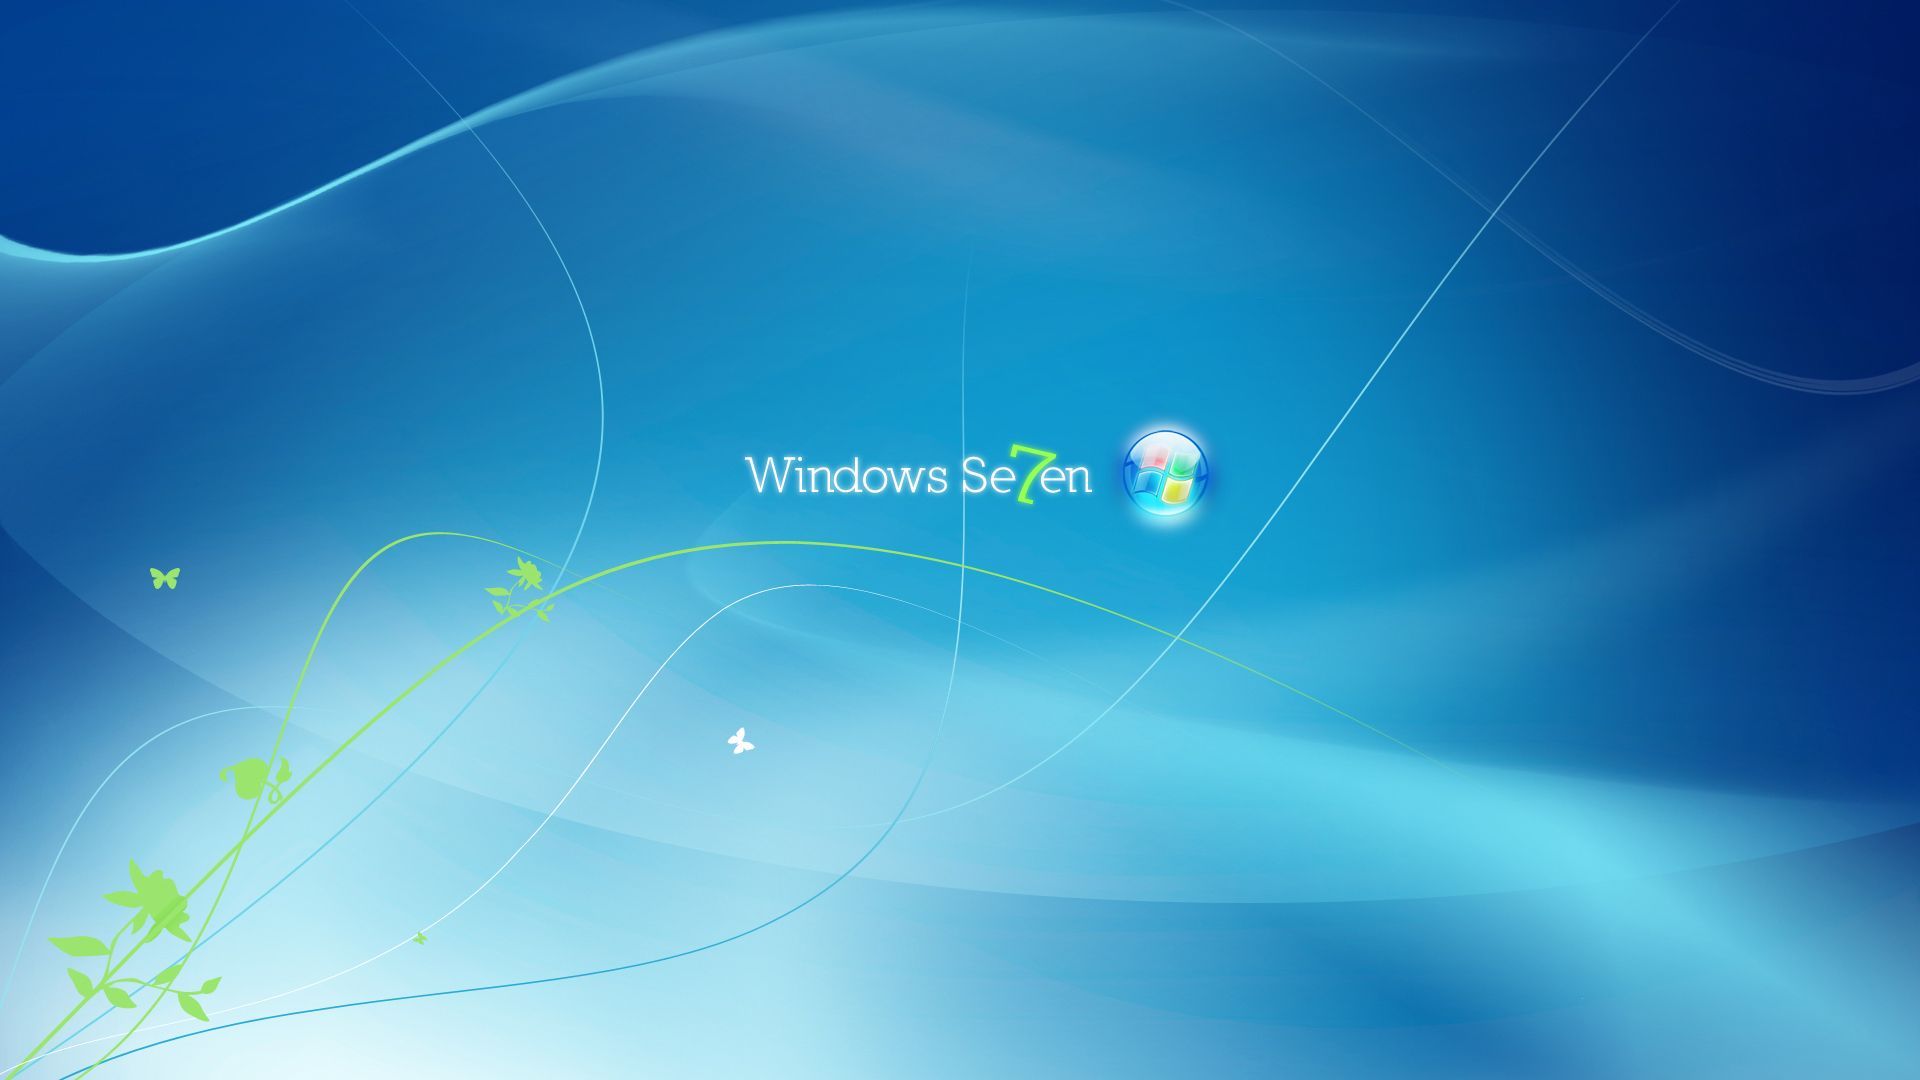 Windows Seven HD 1080p Wallpapers HD Backgrounds